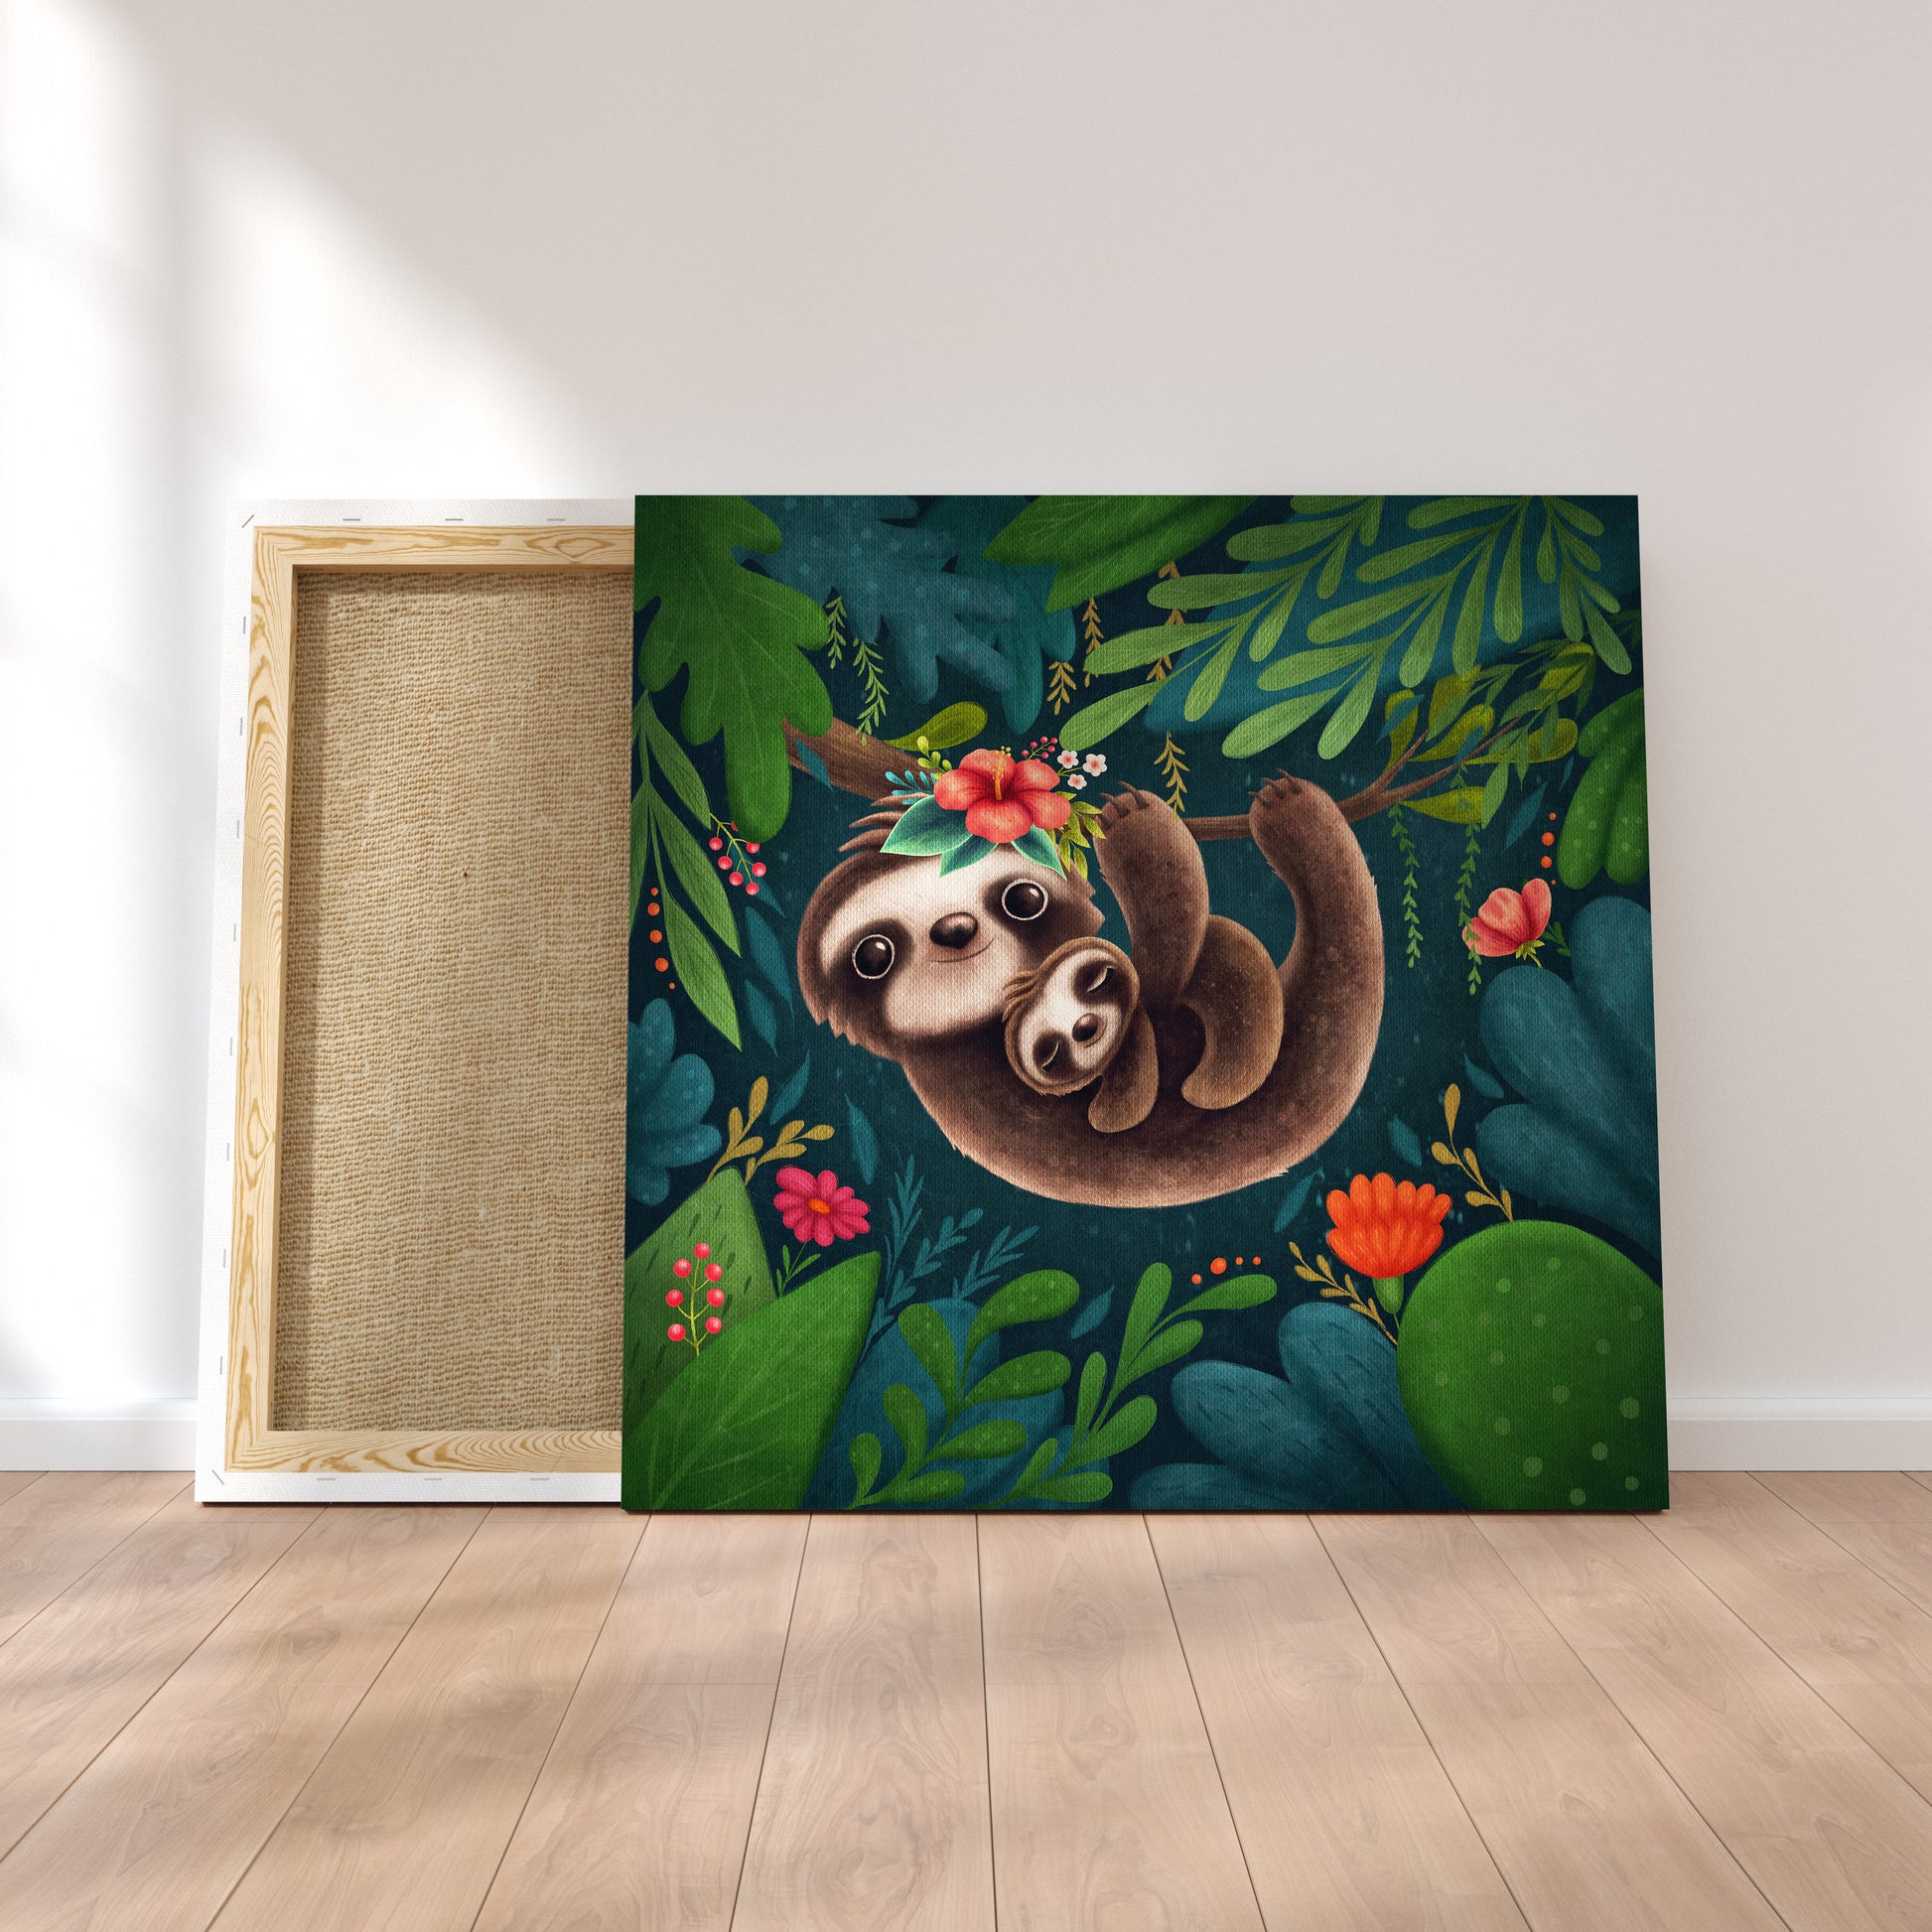 Sloths Family Canvas Print ArtLexy 1 Panel 12"x12" inches 